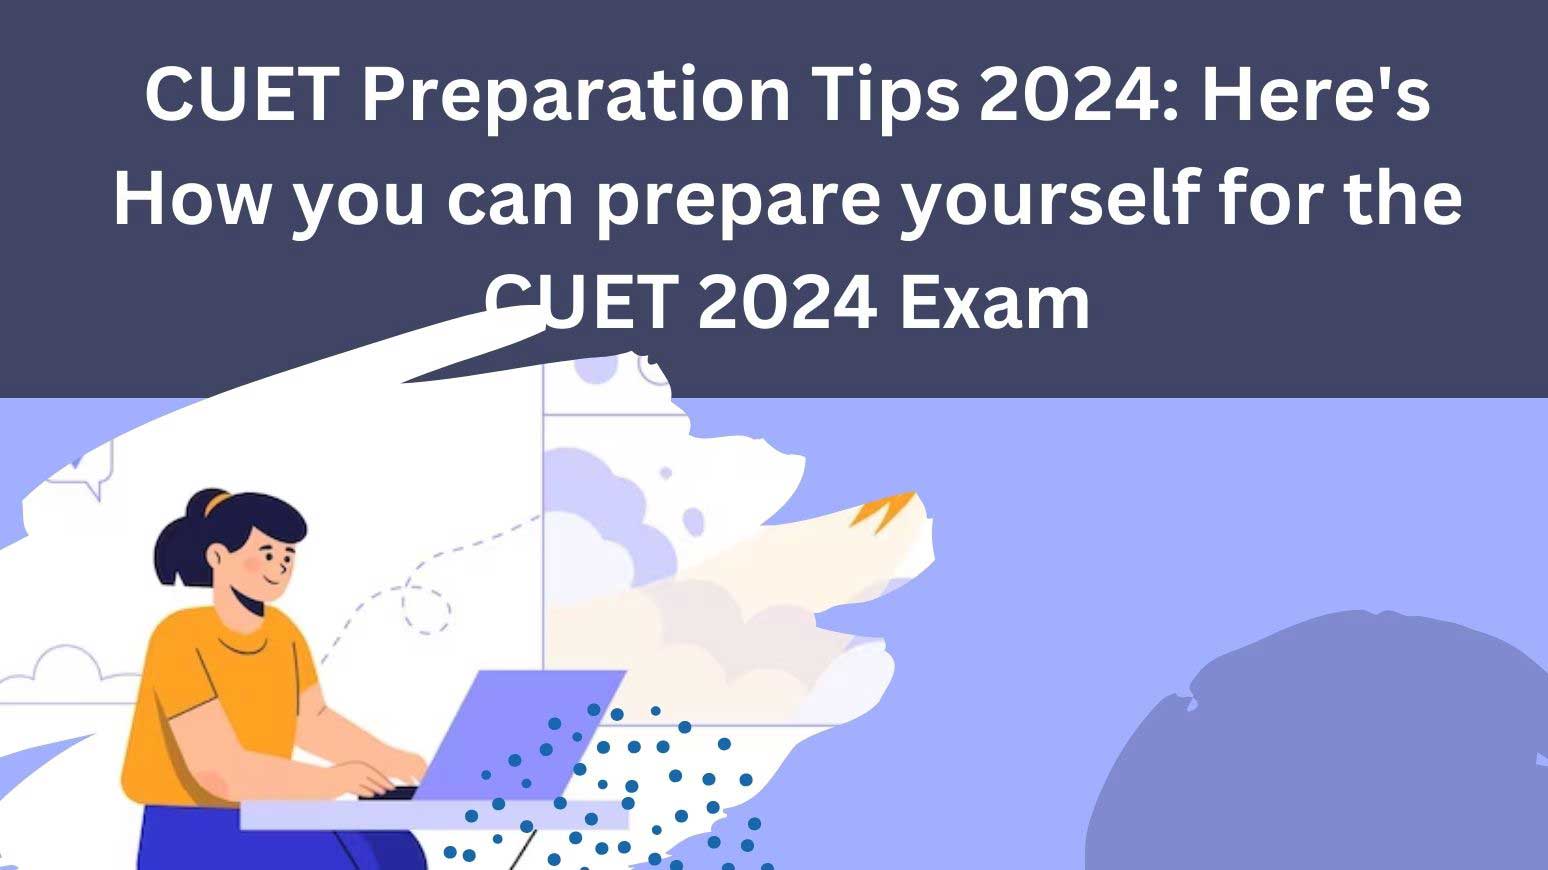 CUET Preparation Tips 2024: Here's How you can prepare yourself for the CUET 2024 Exam.